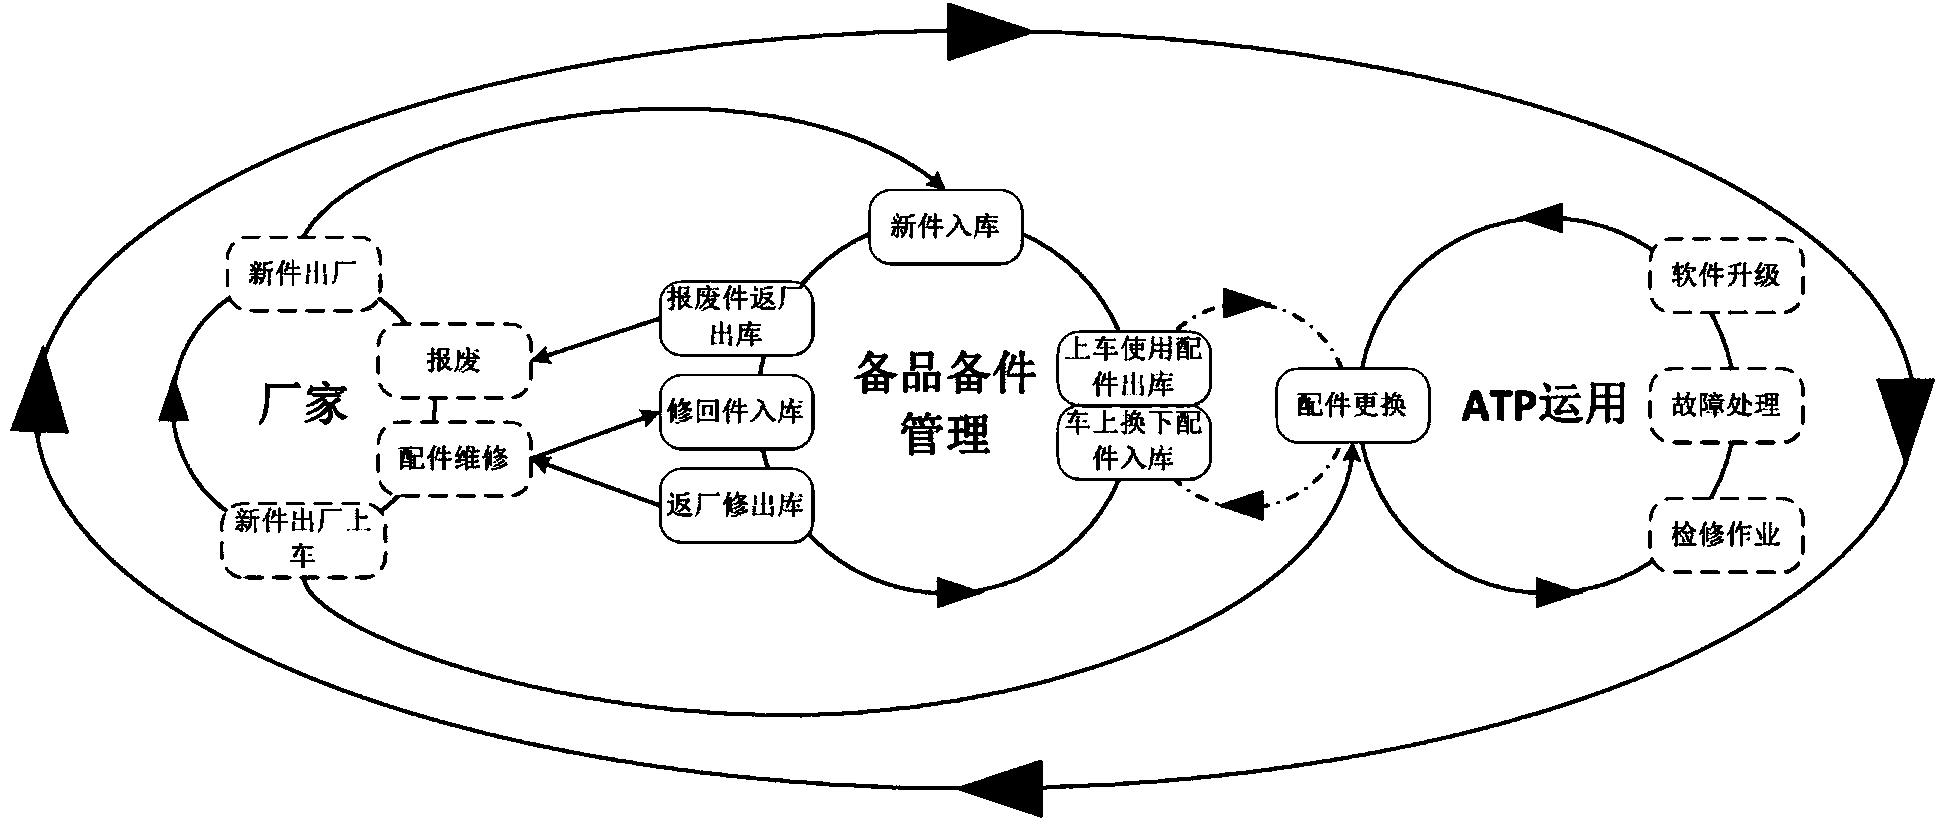 Method and system of product life-cycle management of module-level parts of ATP (Automatic Train Protection System) vehicle equipment